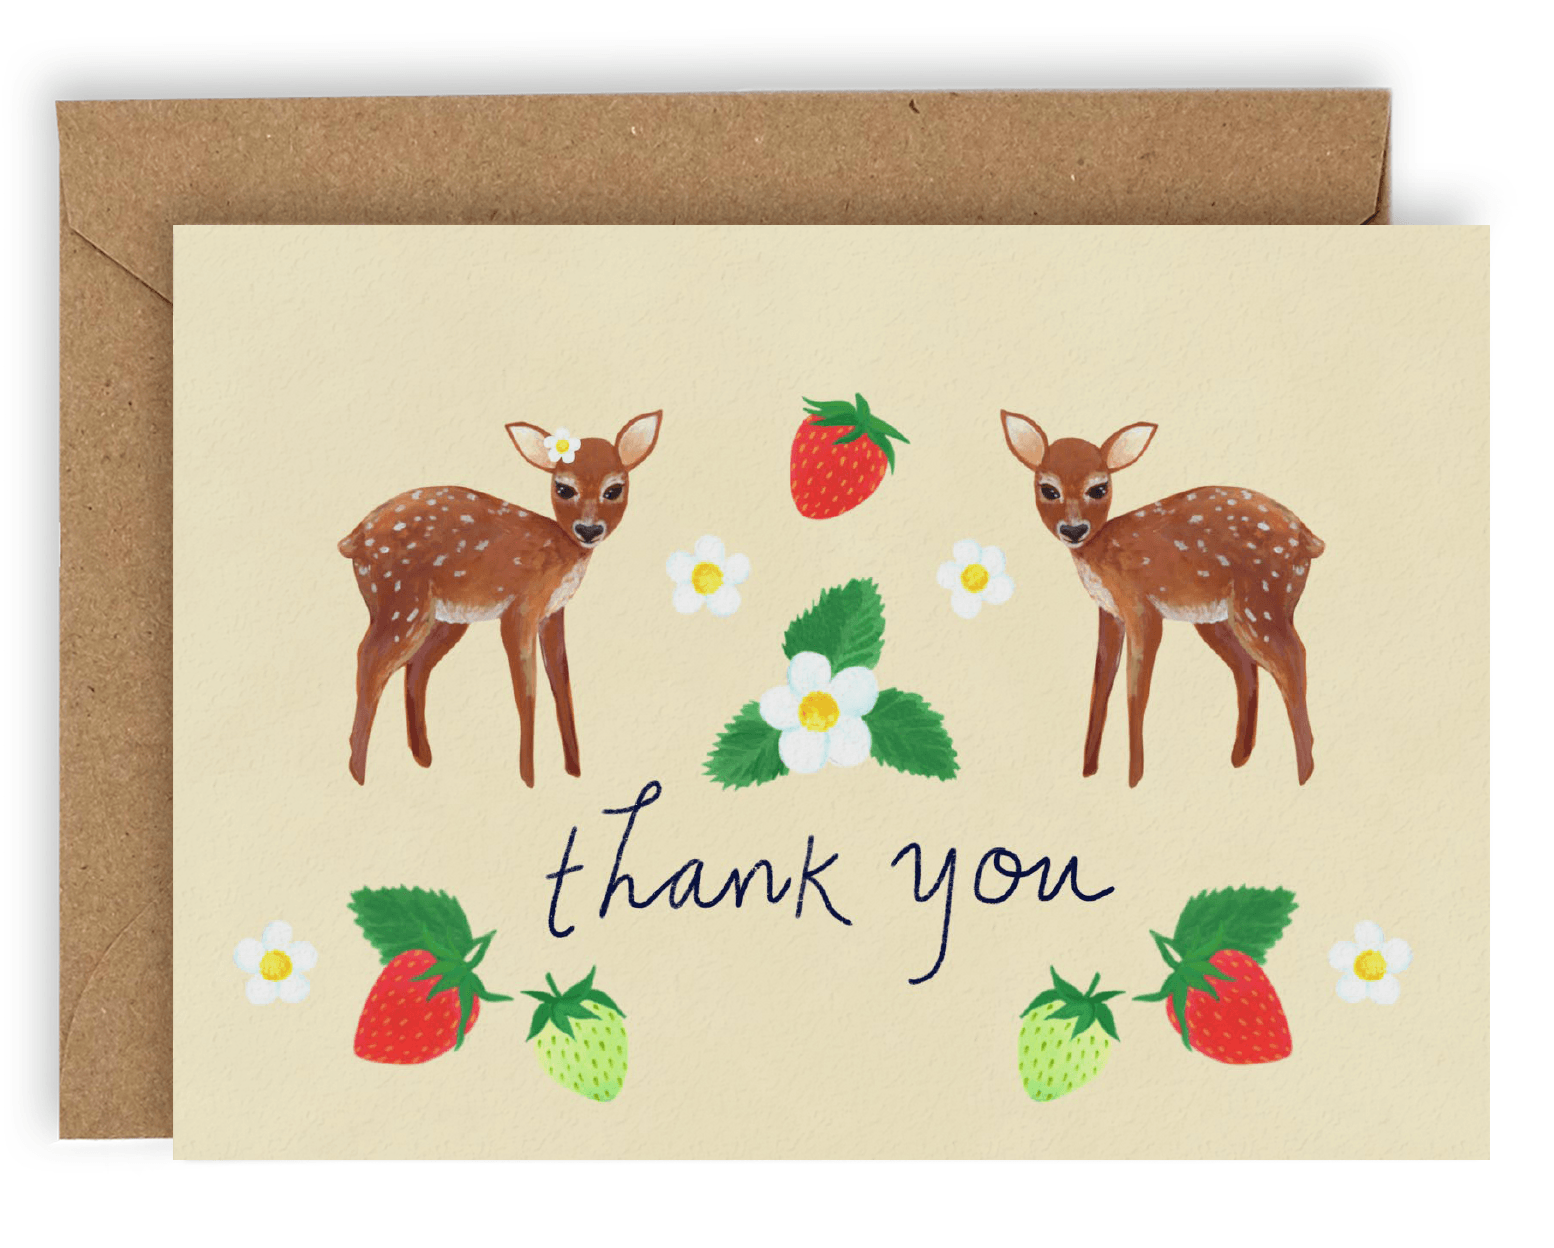 This card features two brown fawn facing each other with heads turned toward the viewer. Three white flowers fill the space between them, with the largest one in the center accompanied by three leaves jutting out on every end and two smaller ones on either side. A lone red strawberry looms above them. Below are the words "Thank You" written in cursive black ink with green, followed by red, strawberries and white flowers on either side. Printed on a cream colored background. Shown with Kraft envelope.